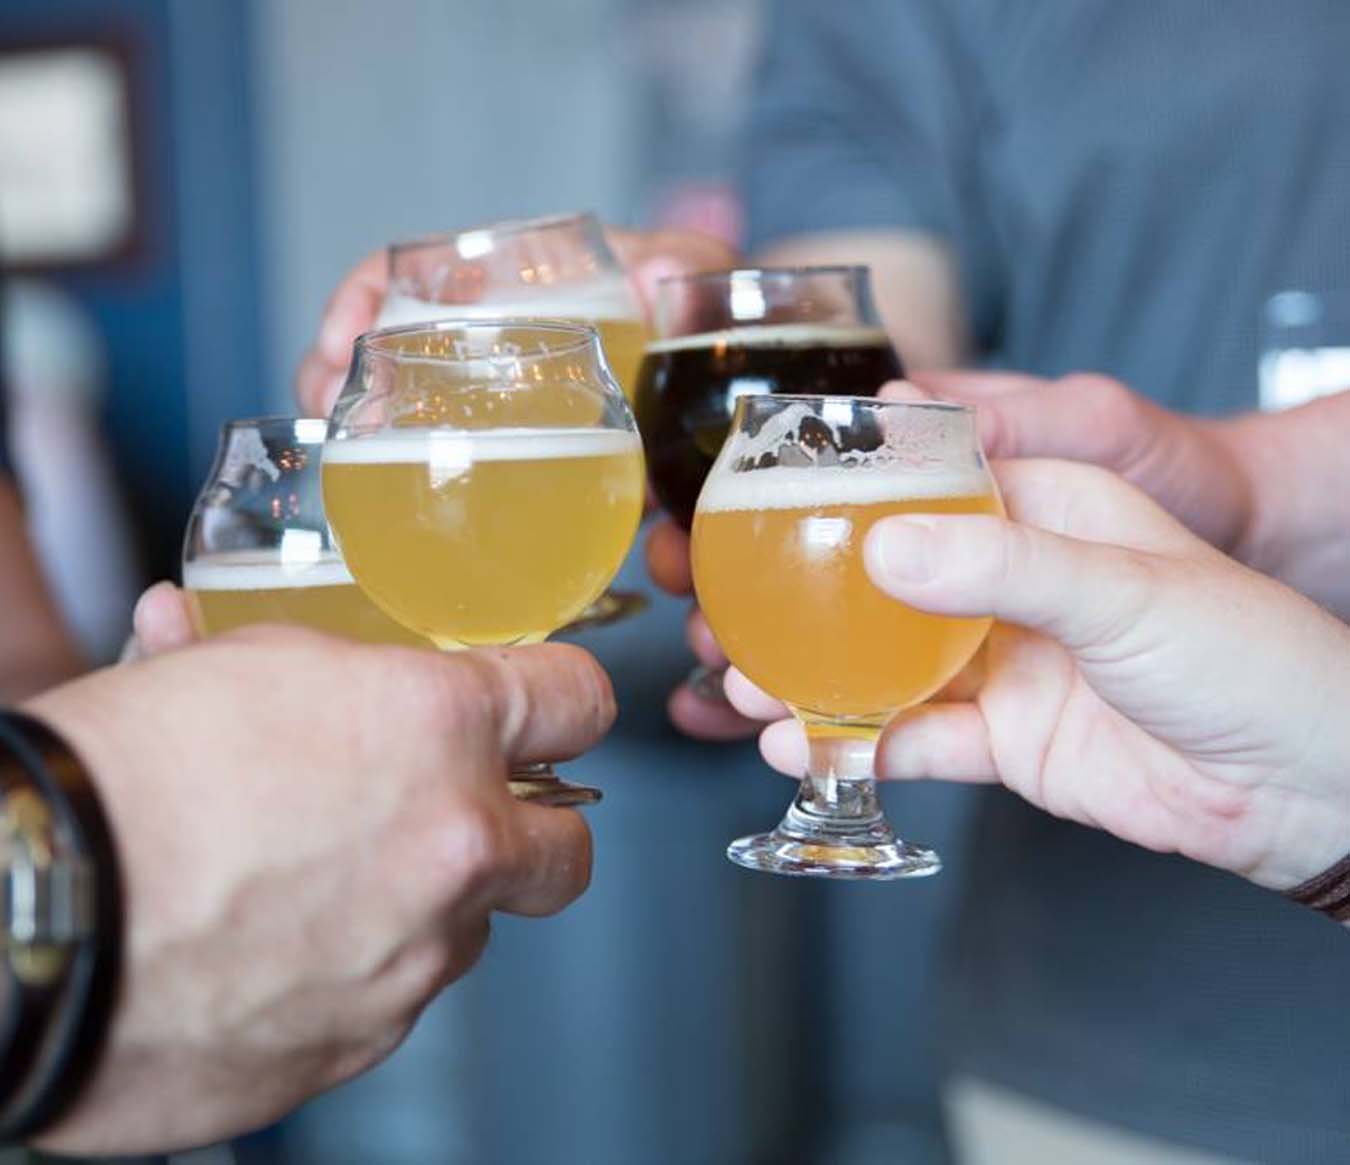 Things to Do in Pittsburgh - City Brew Tours Pittsburgh 